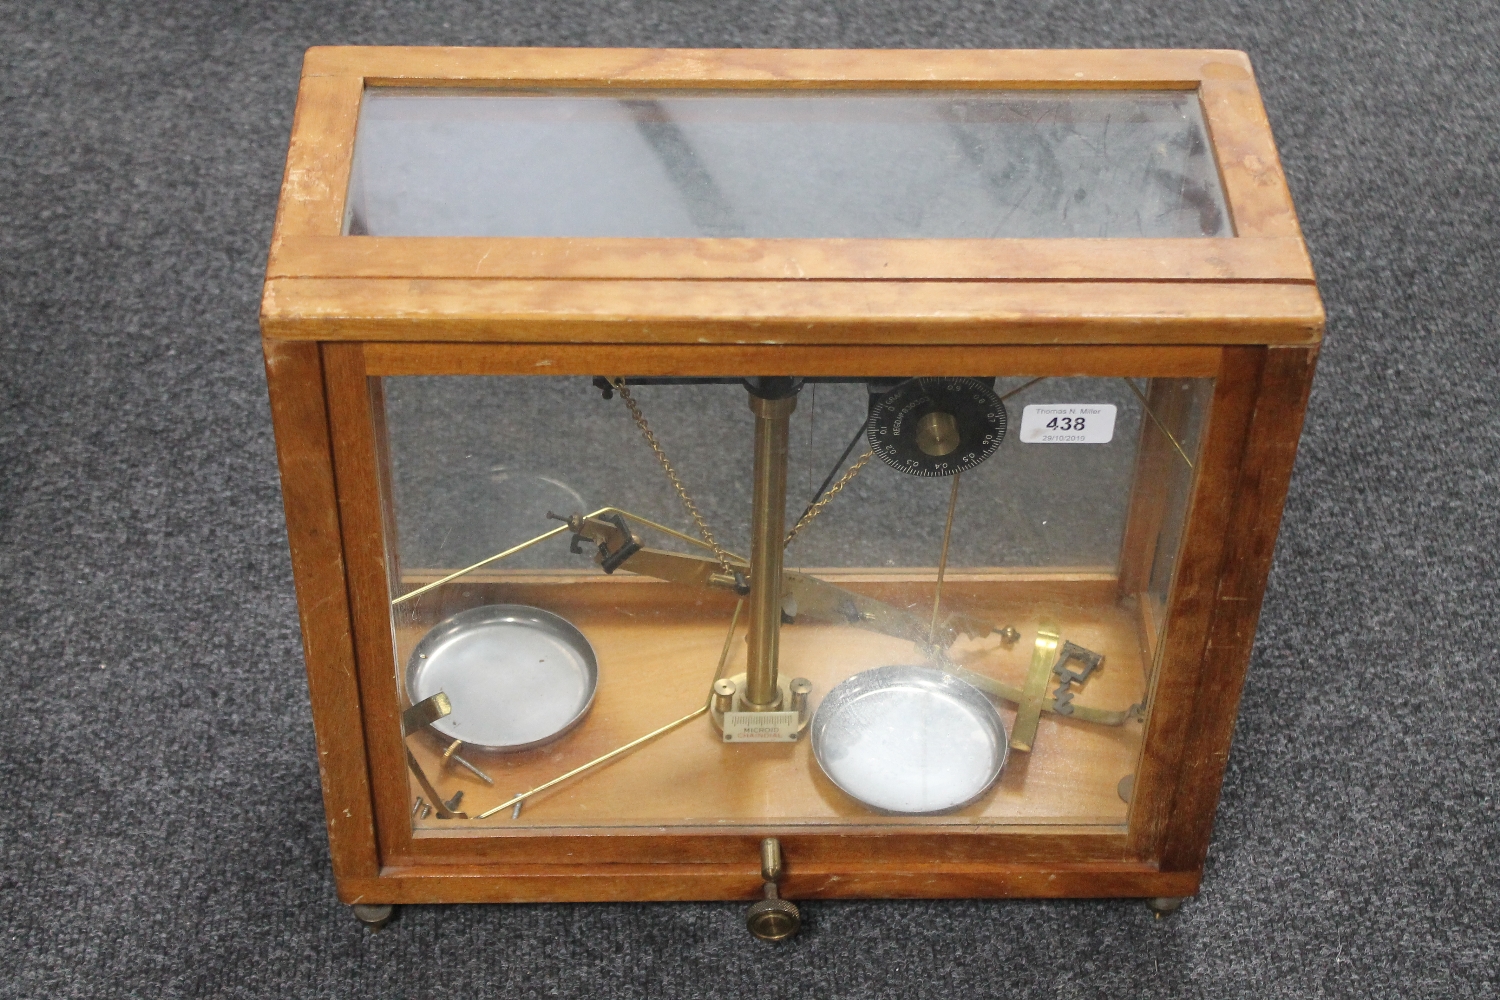 A set of chemist's scales in glazed box